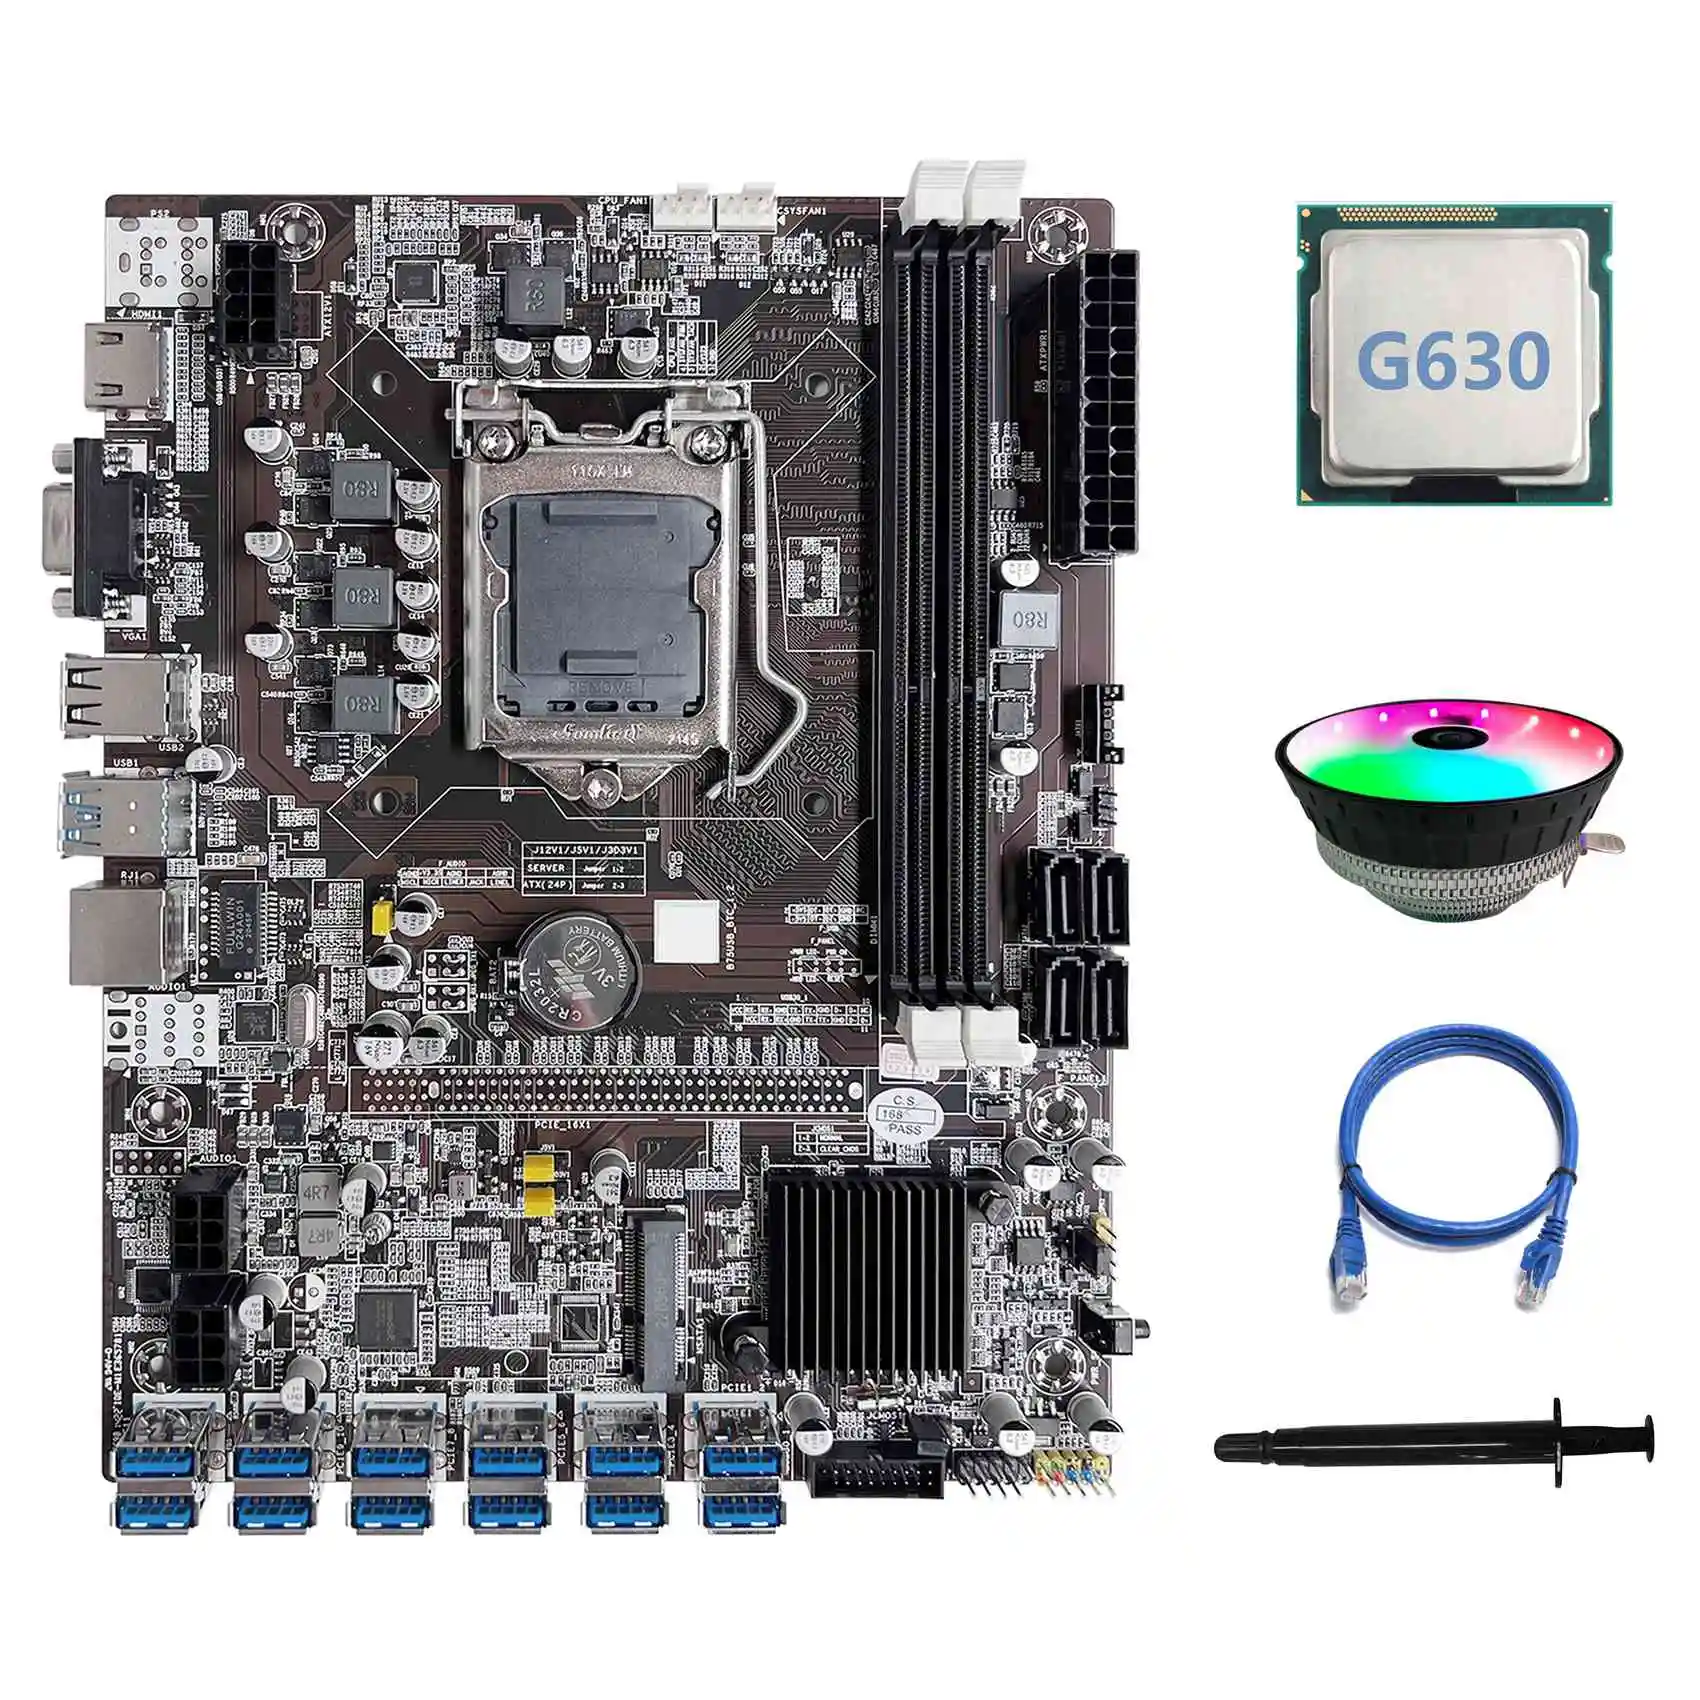 

B75 ETH Mining Motherboard 12 PCIE to USB LGA1155 Motherboard+G630 CPU+RGB Cooling Fan+Thermal Grease+RJ45 Network Cable